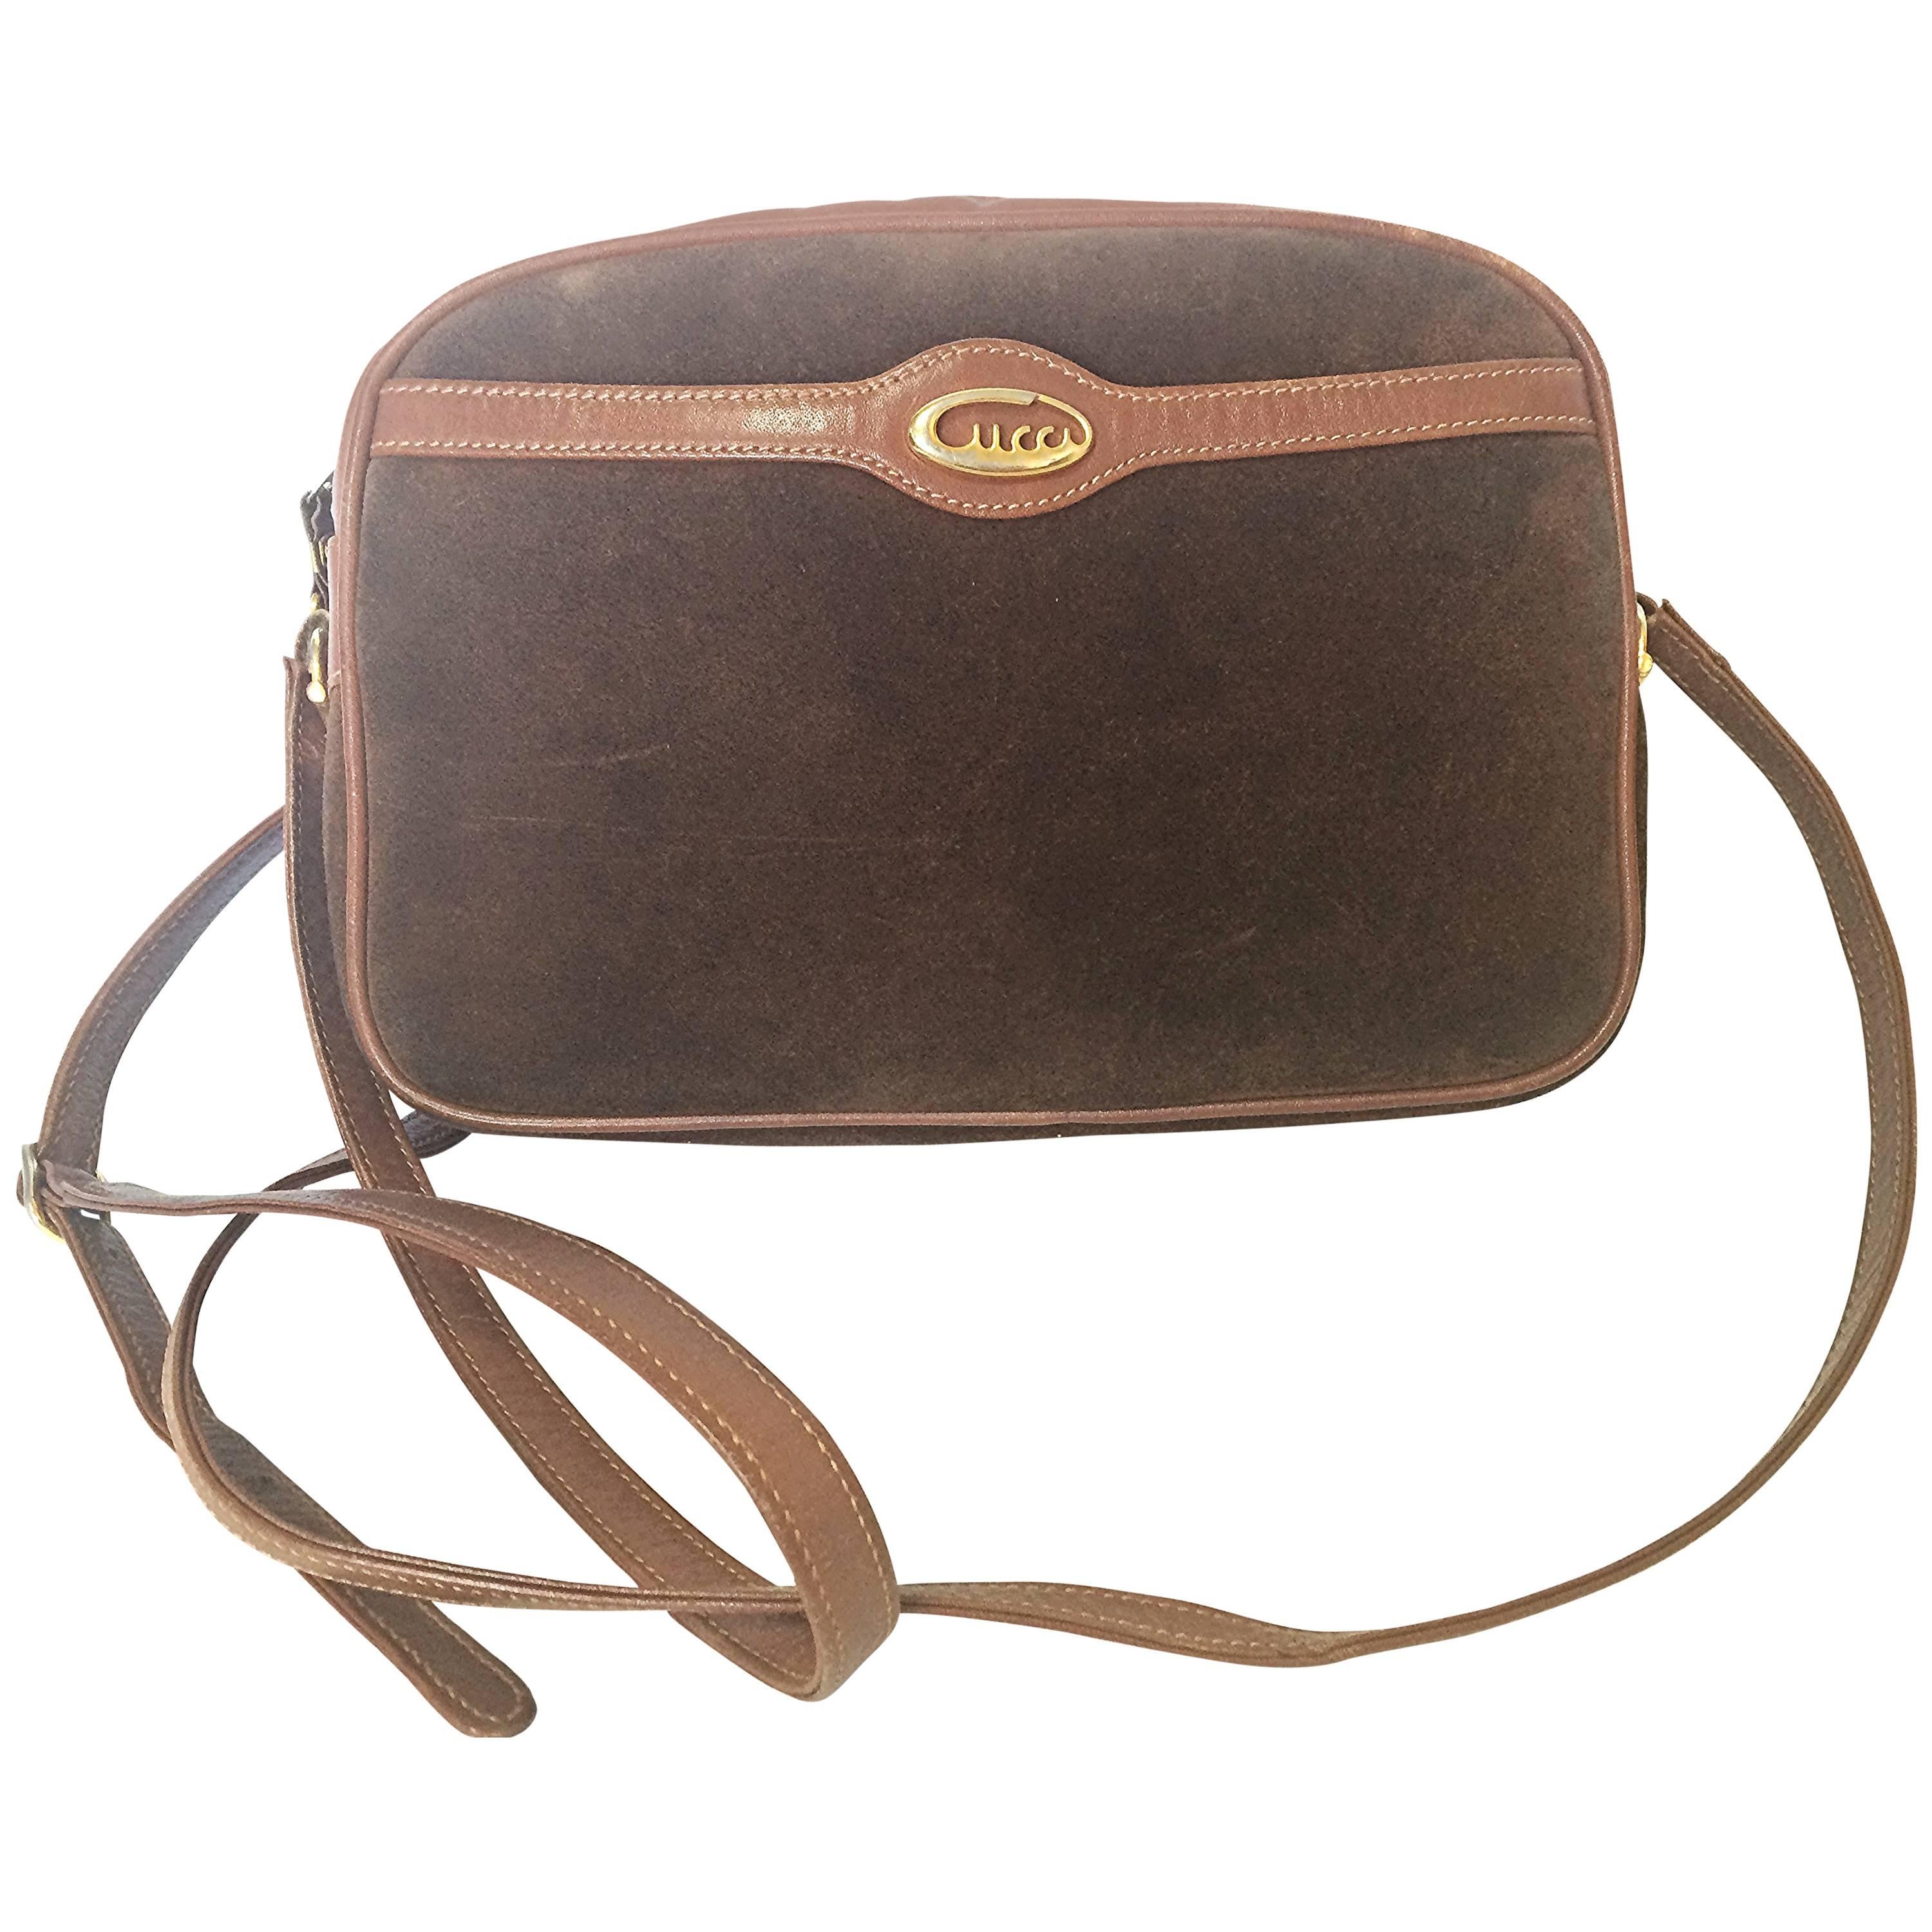 Vintage Gucci brown suede oval shape shoulder purse with riri zippers.